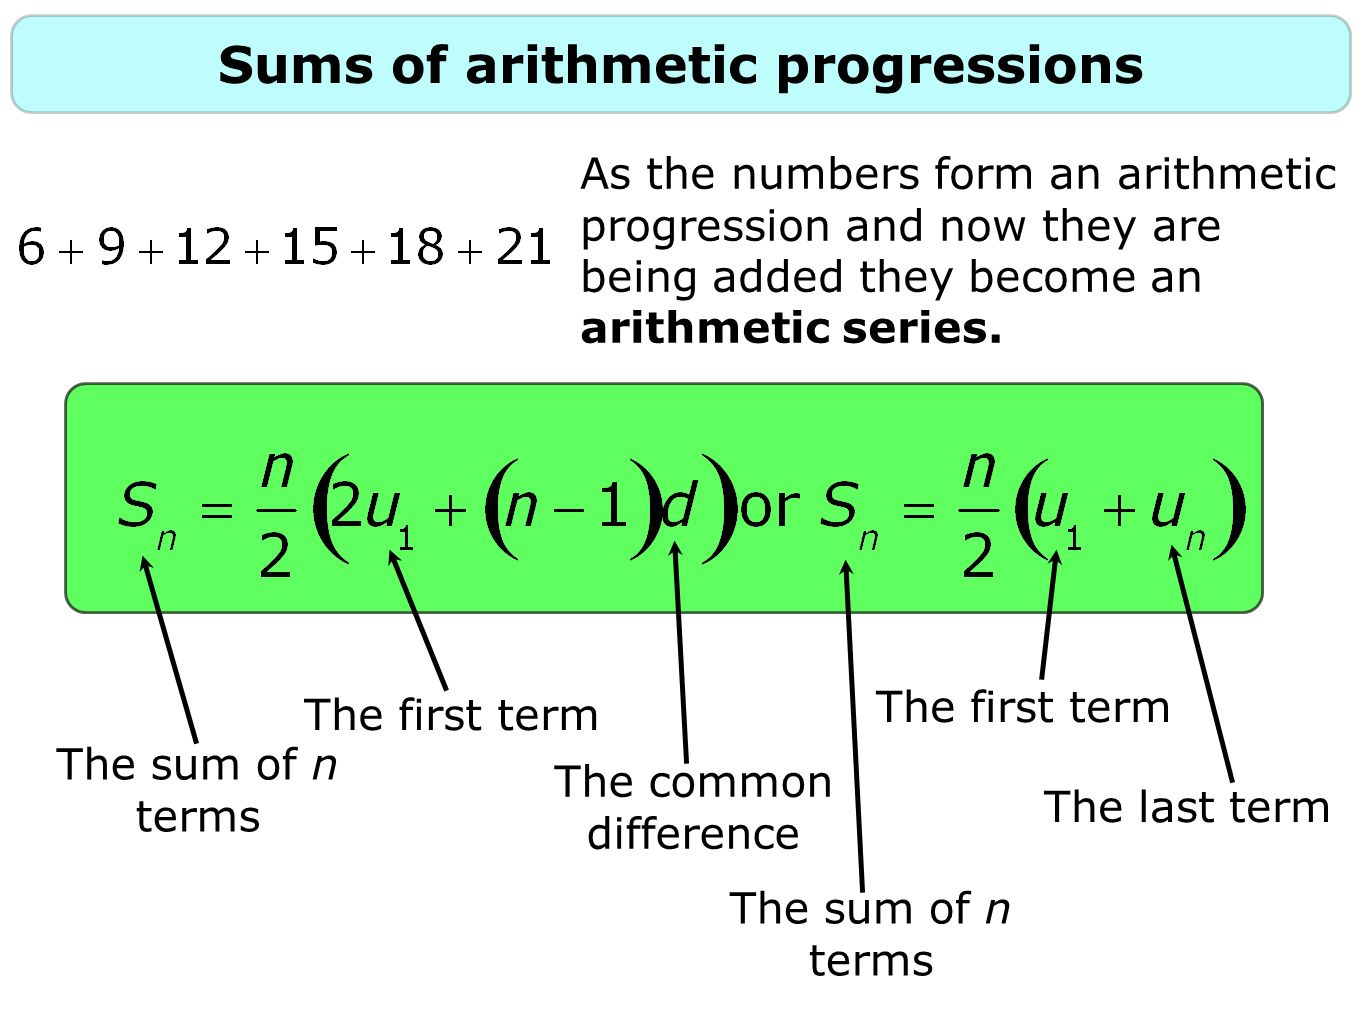 Sums of arithmetic progressions As the numbers form an arithmetic progression and now they are being added they become an arithmetic series.